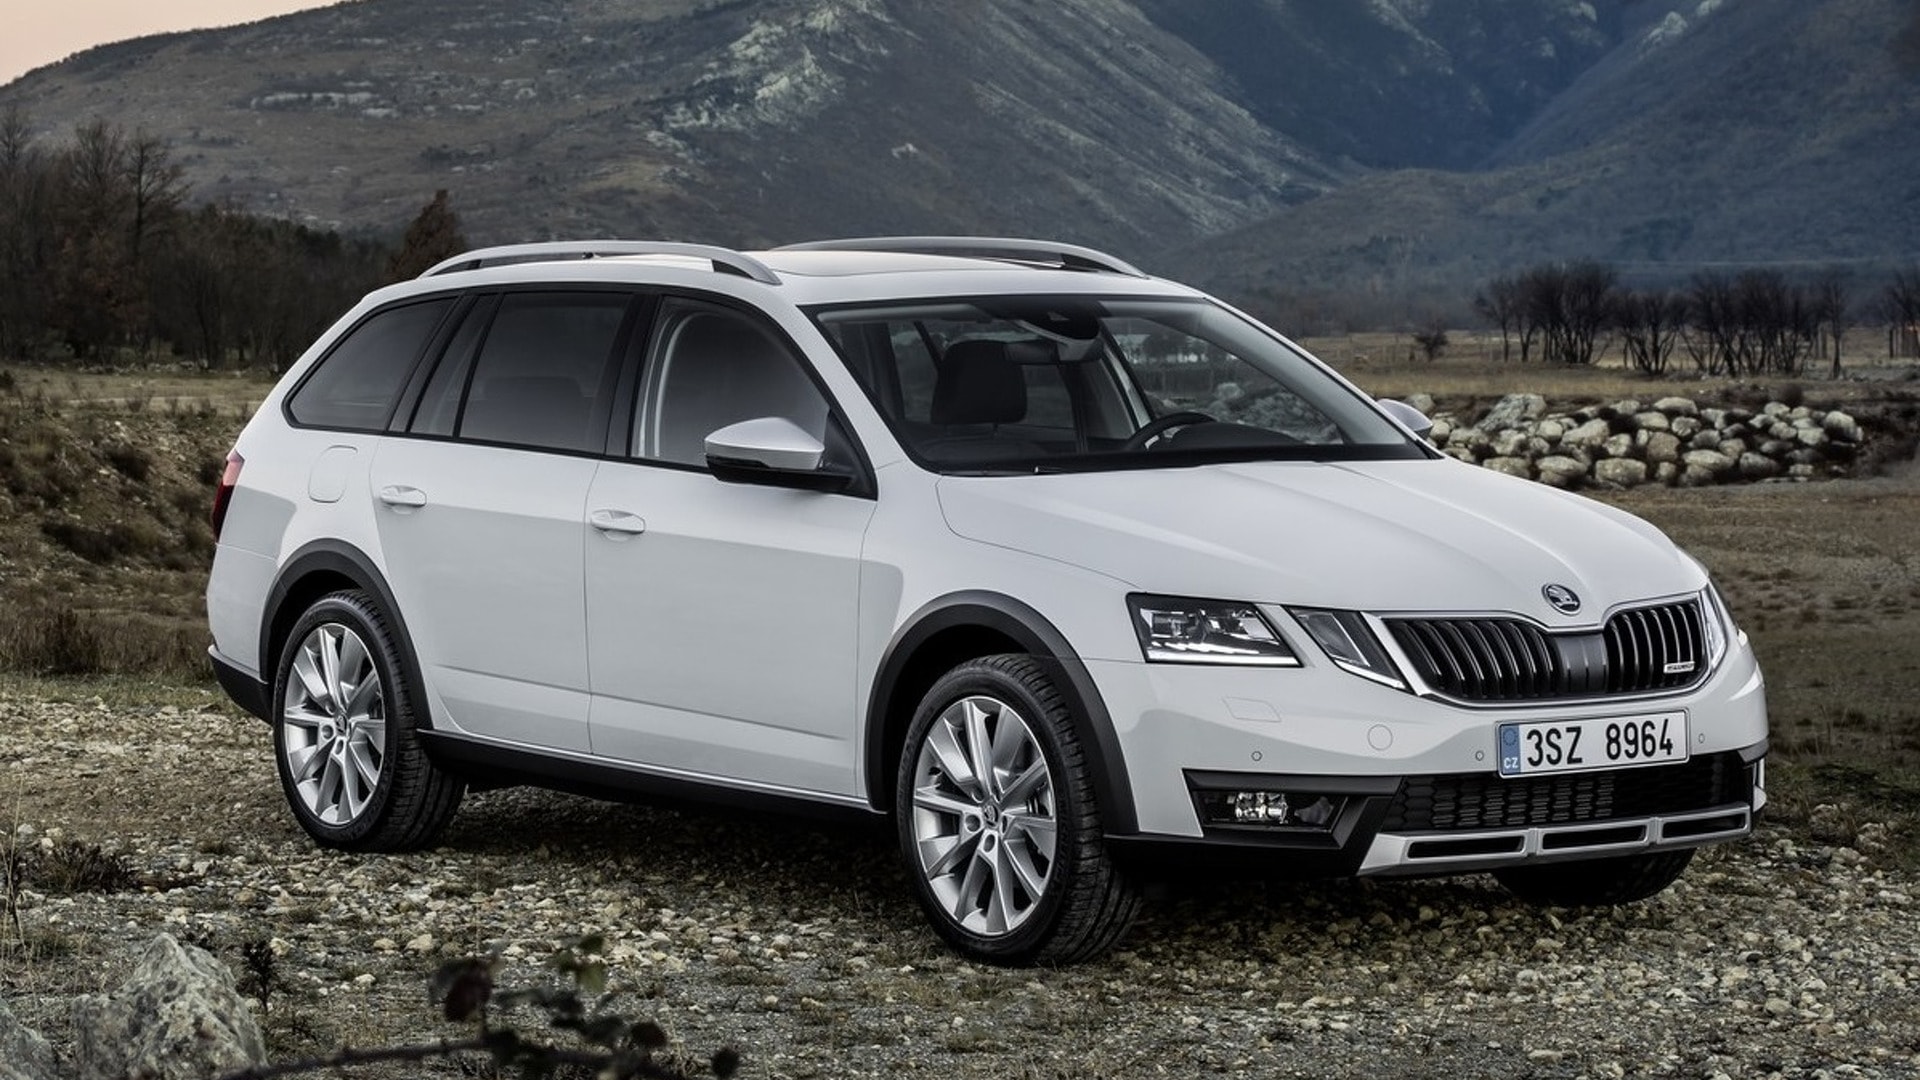 2017 Skoda Octavia Scout Revealed, Three Engines Offering Between 150 and  184 HP - autoevolution